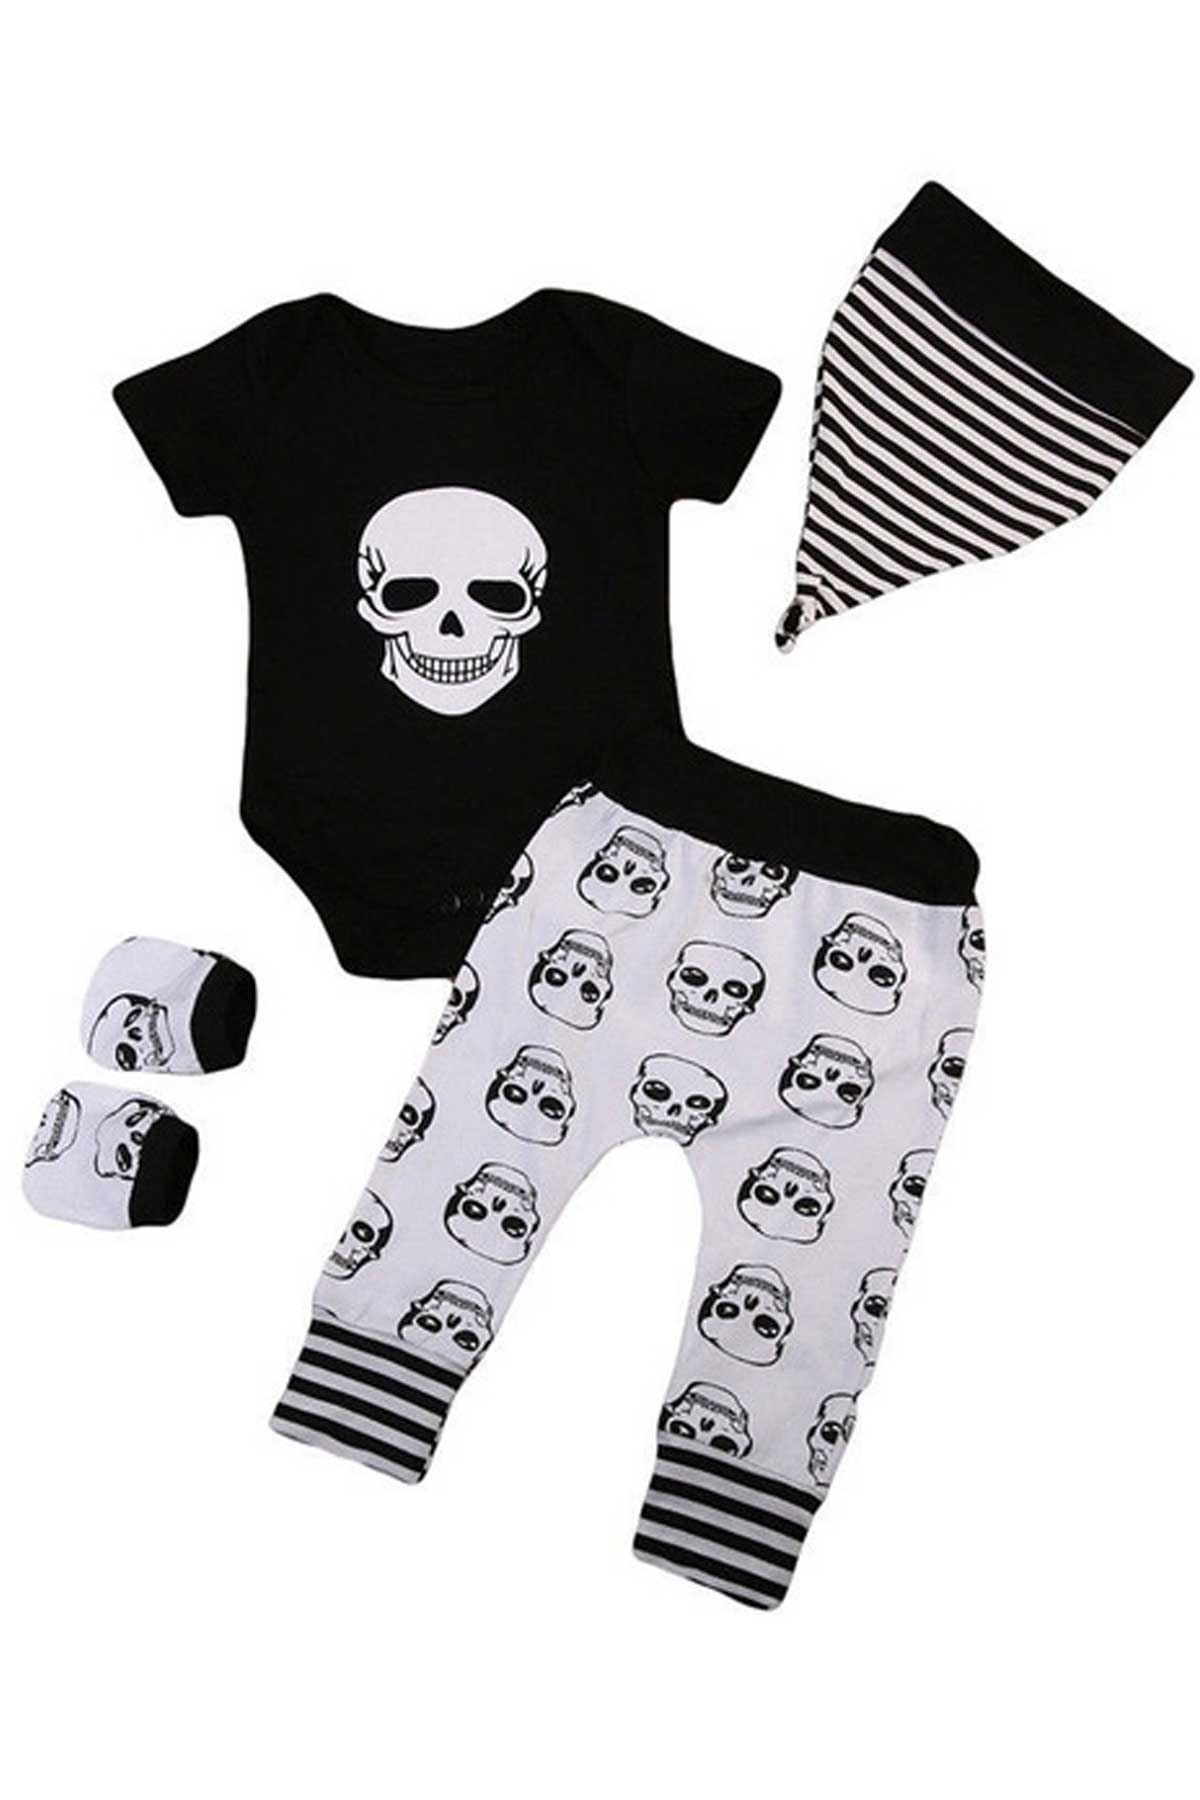 2021 Summer Baby Boy Girl Skull Clothes Romper + Long Pant Hat 4 pcs Outfit Set 0-18M Baby rompers girls boys newborn clothes